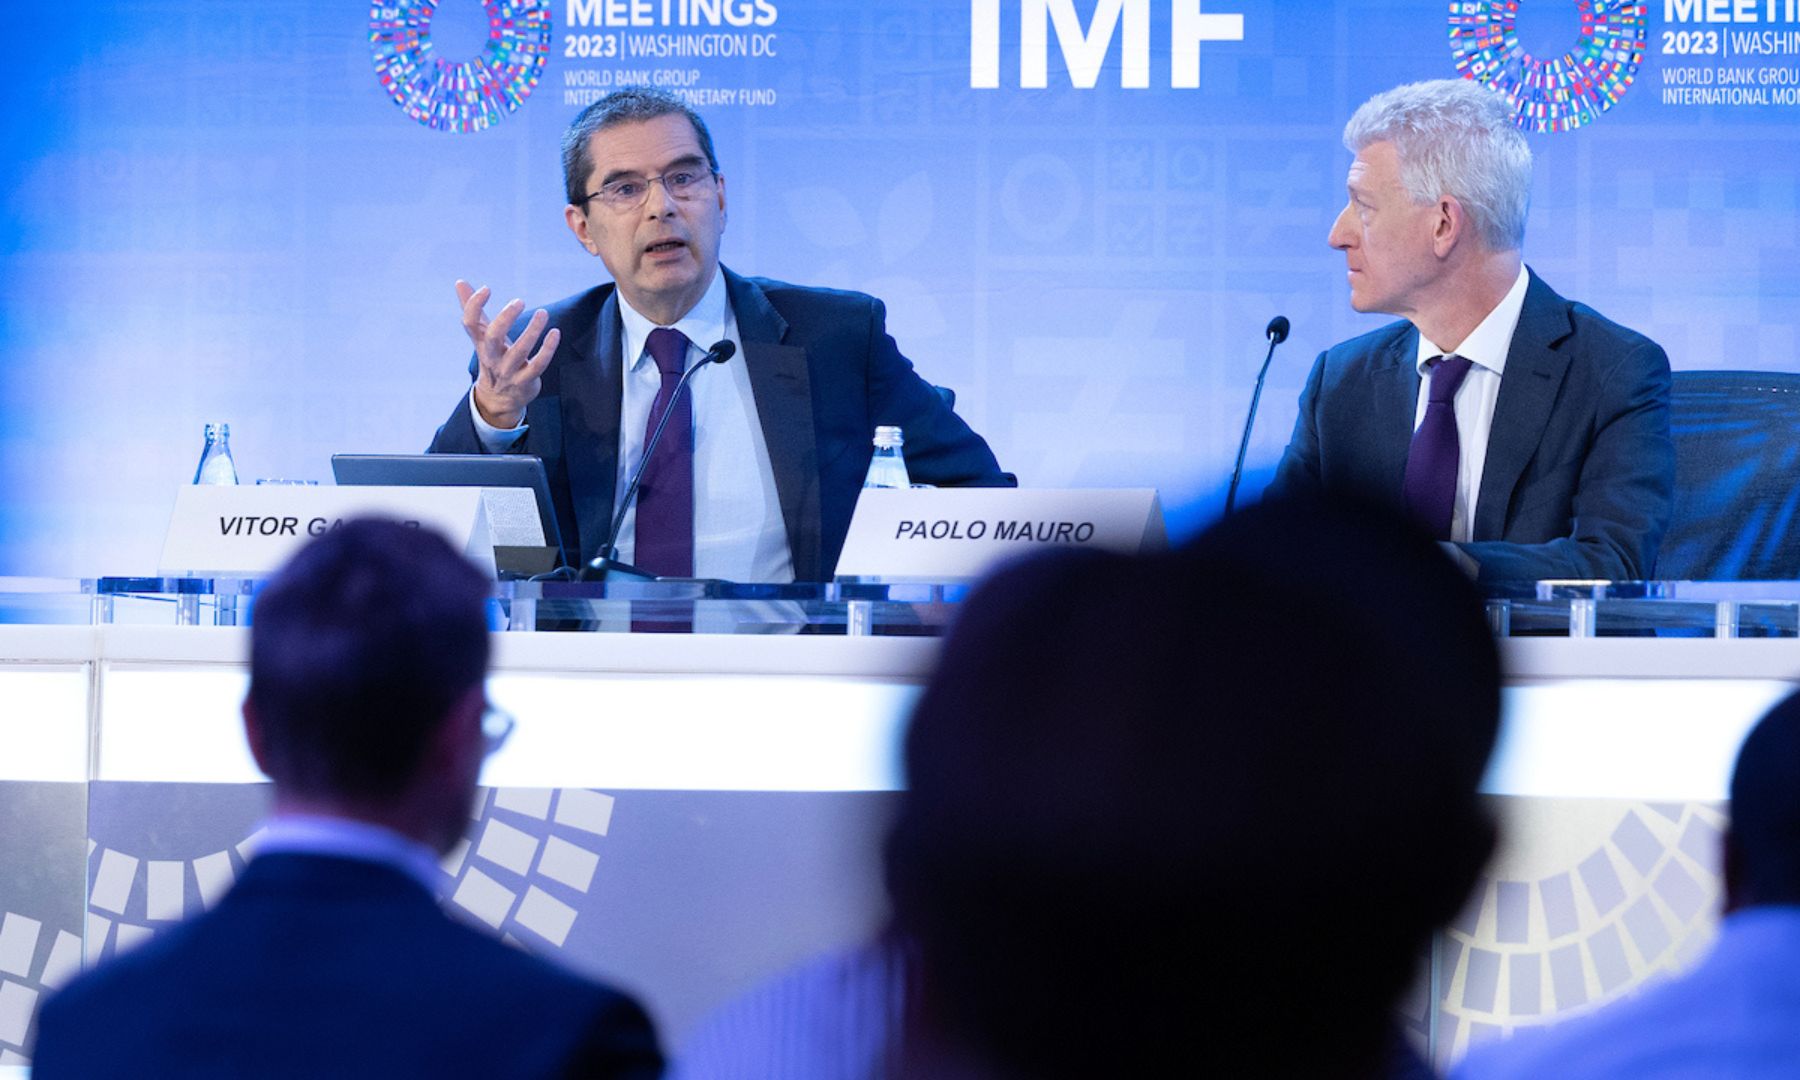 IMF Meetings Press Conference Fiscal Monitor with  Vitor Gaspar and Paolo Mauro